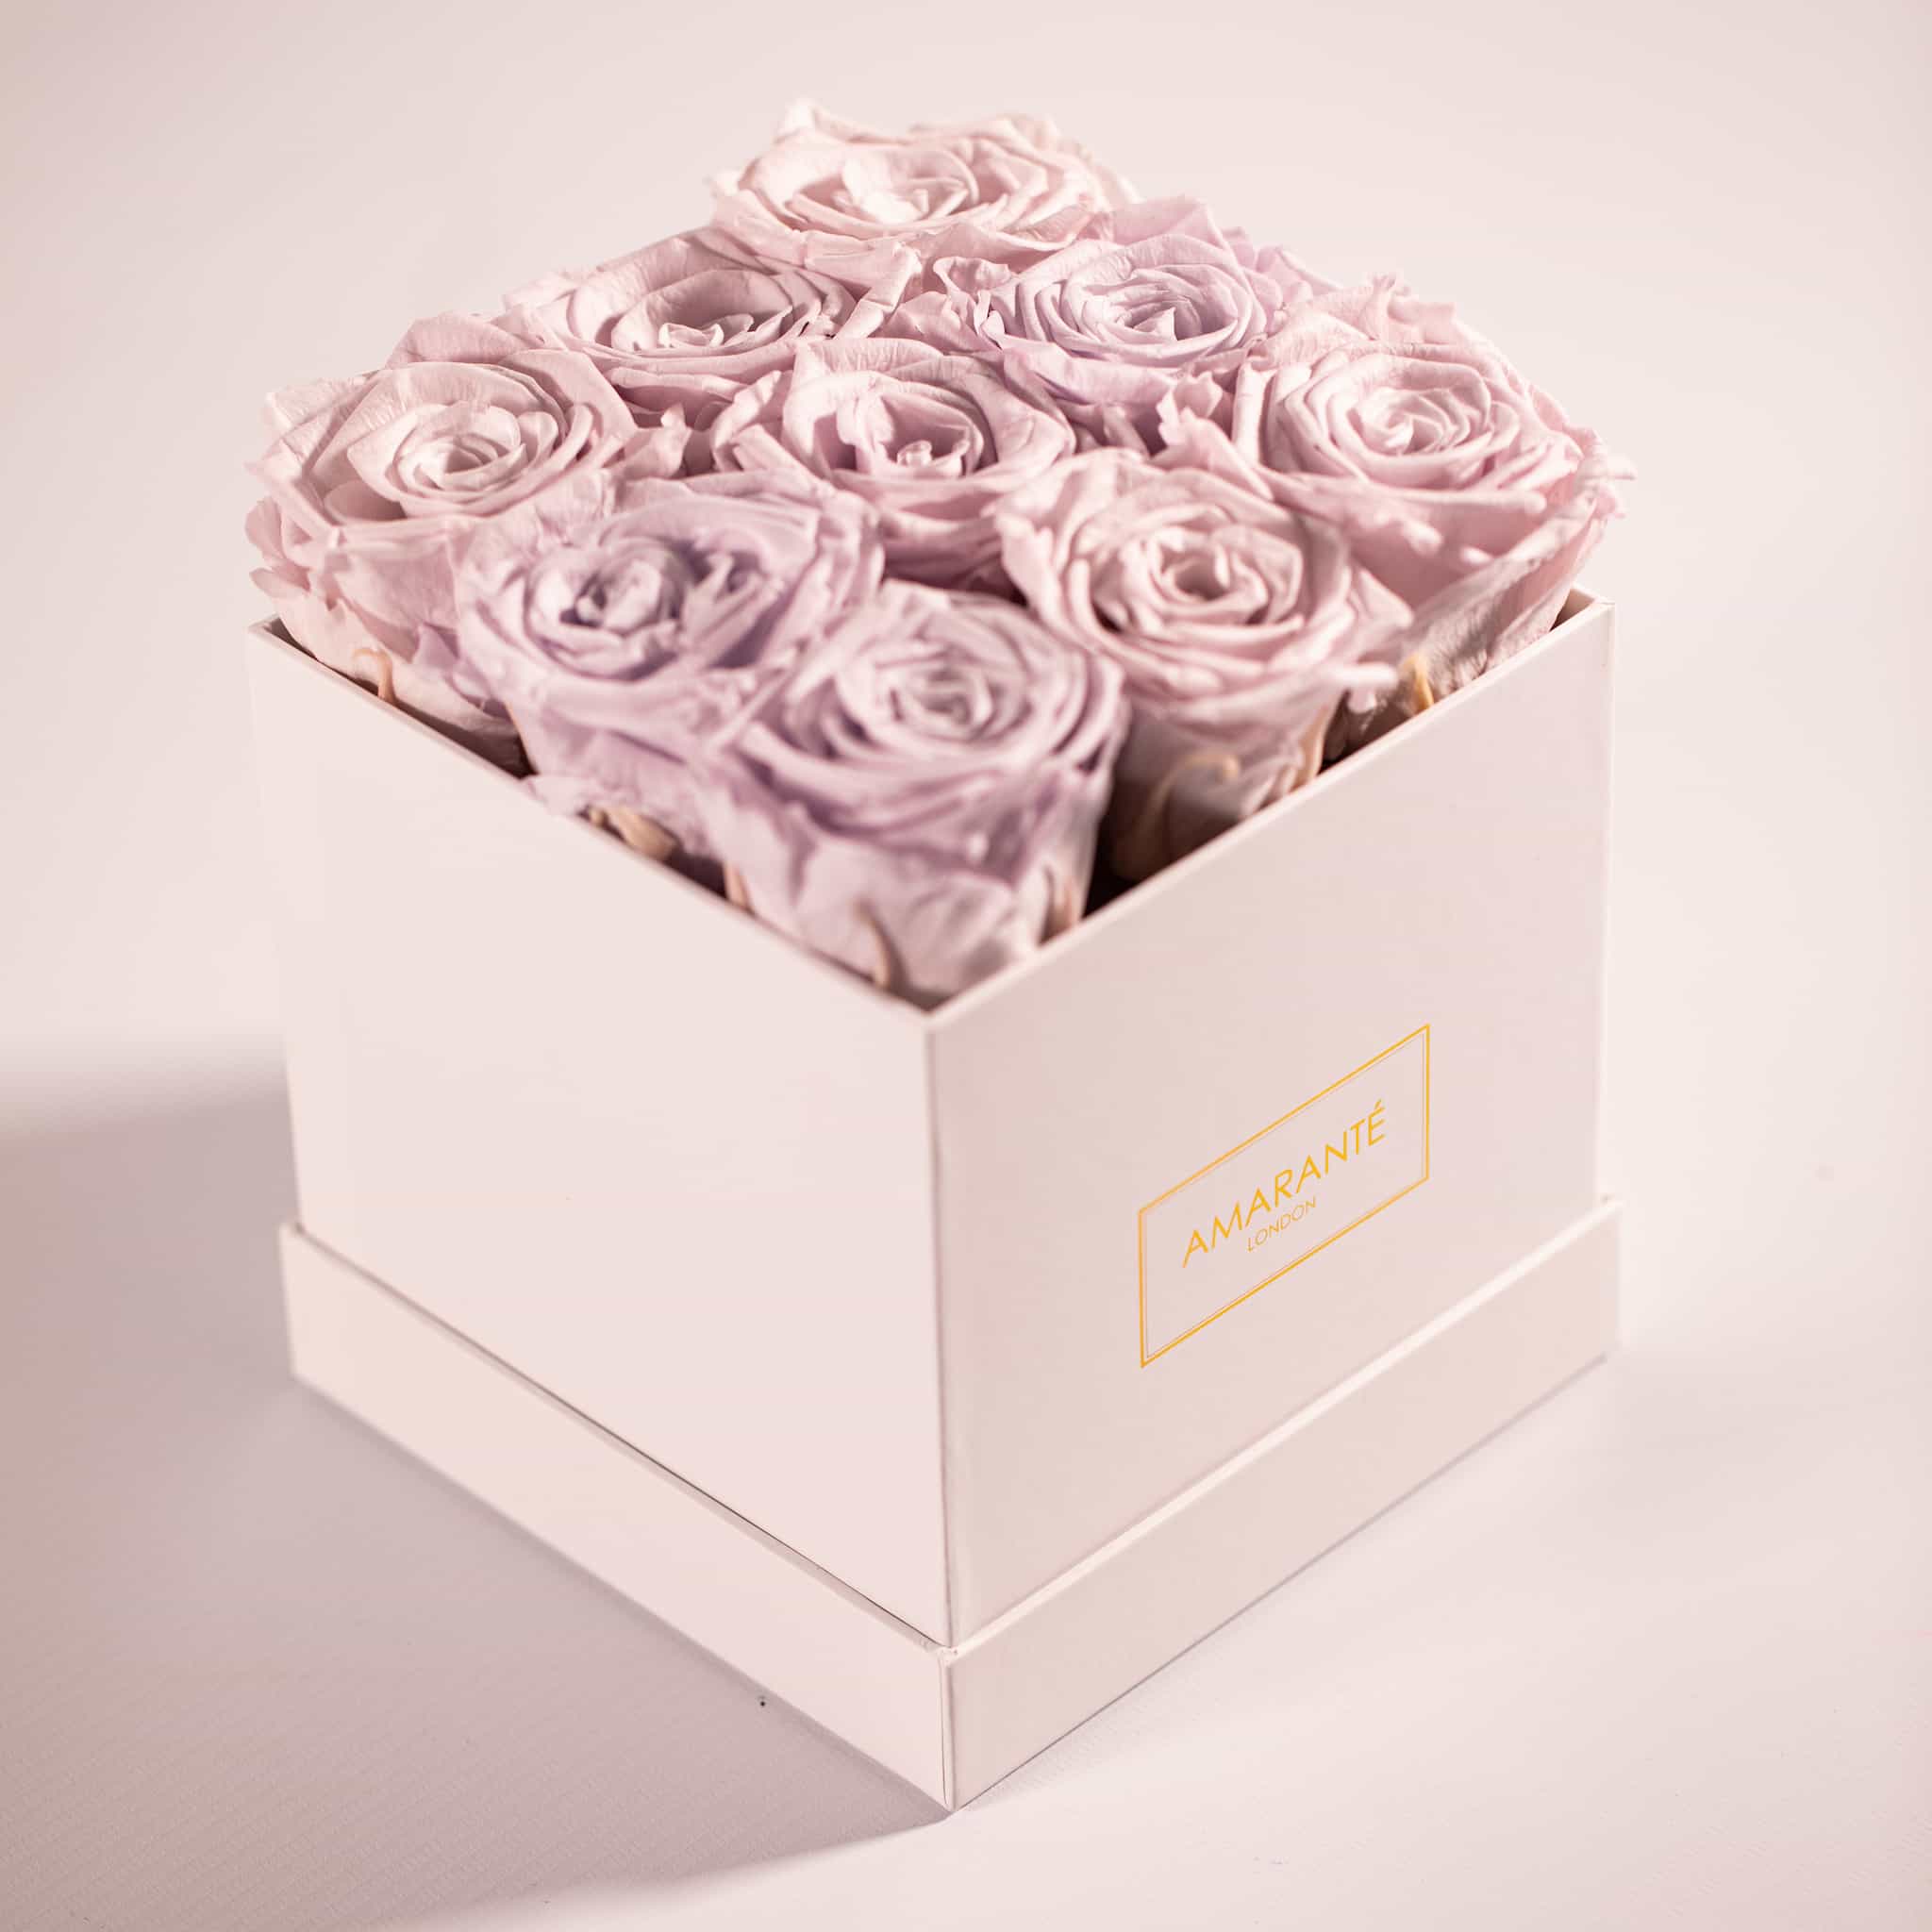 Surprise Your Loved One With Anniversary Flowers - Roses in Hatbox